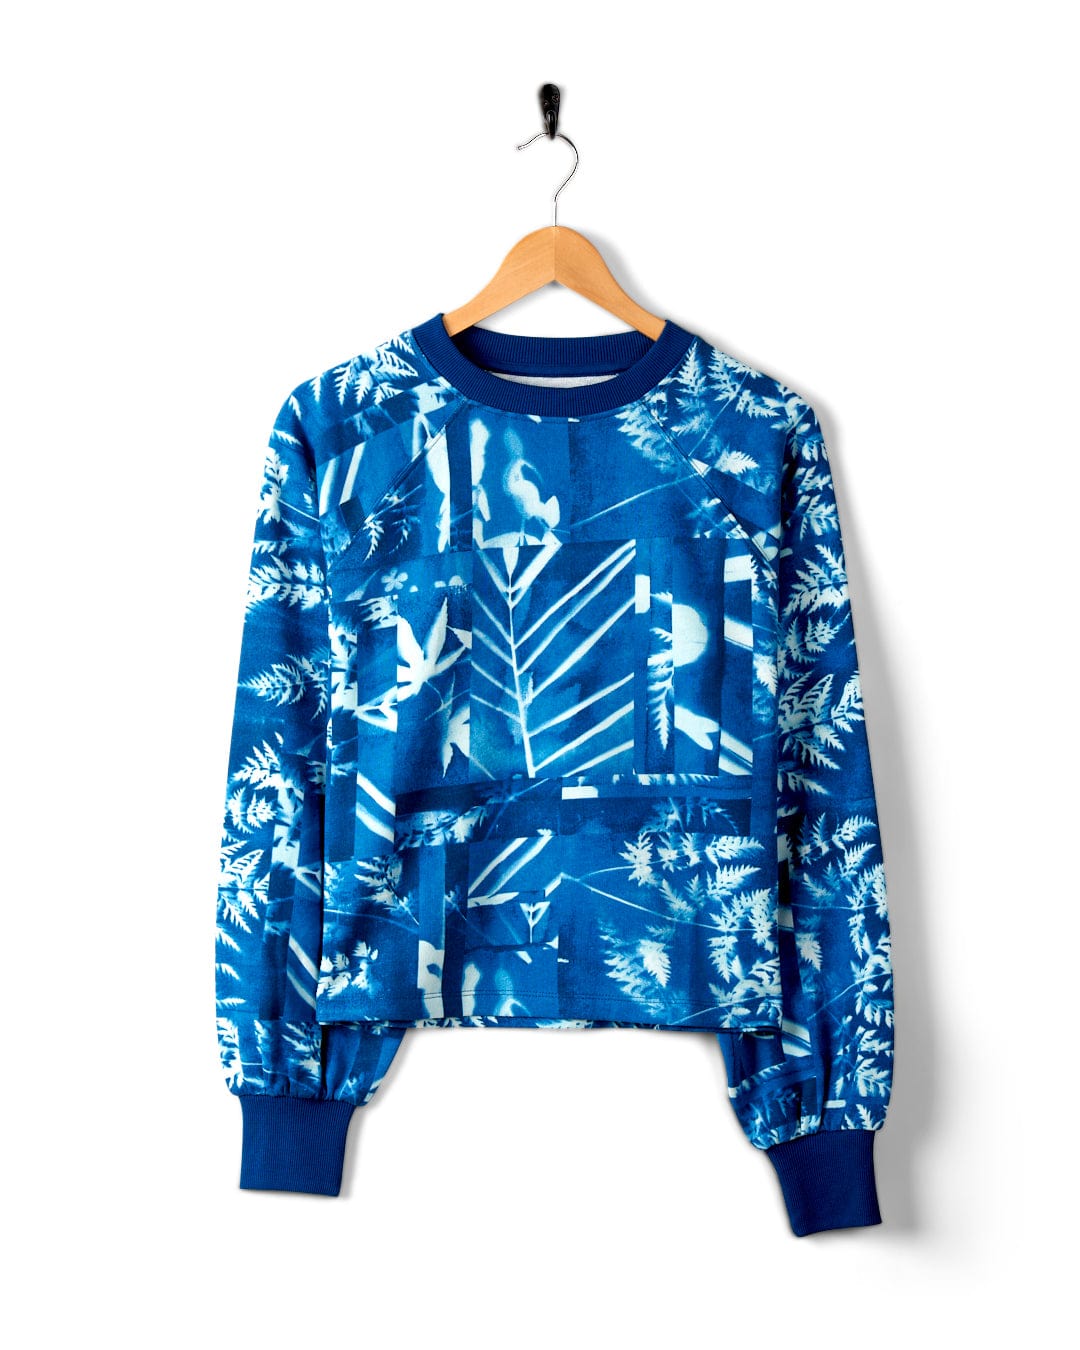 A Cyanotype - Womens Recycled Boxy Sweat - Blue by Saltrock with a white abstract forest print, hanging on a wooden hanger against a plain white background. Made from recycled materials, this piece features a boxy fit for added comfort and style.